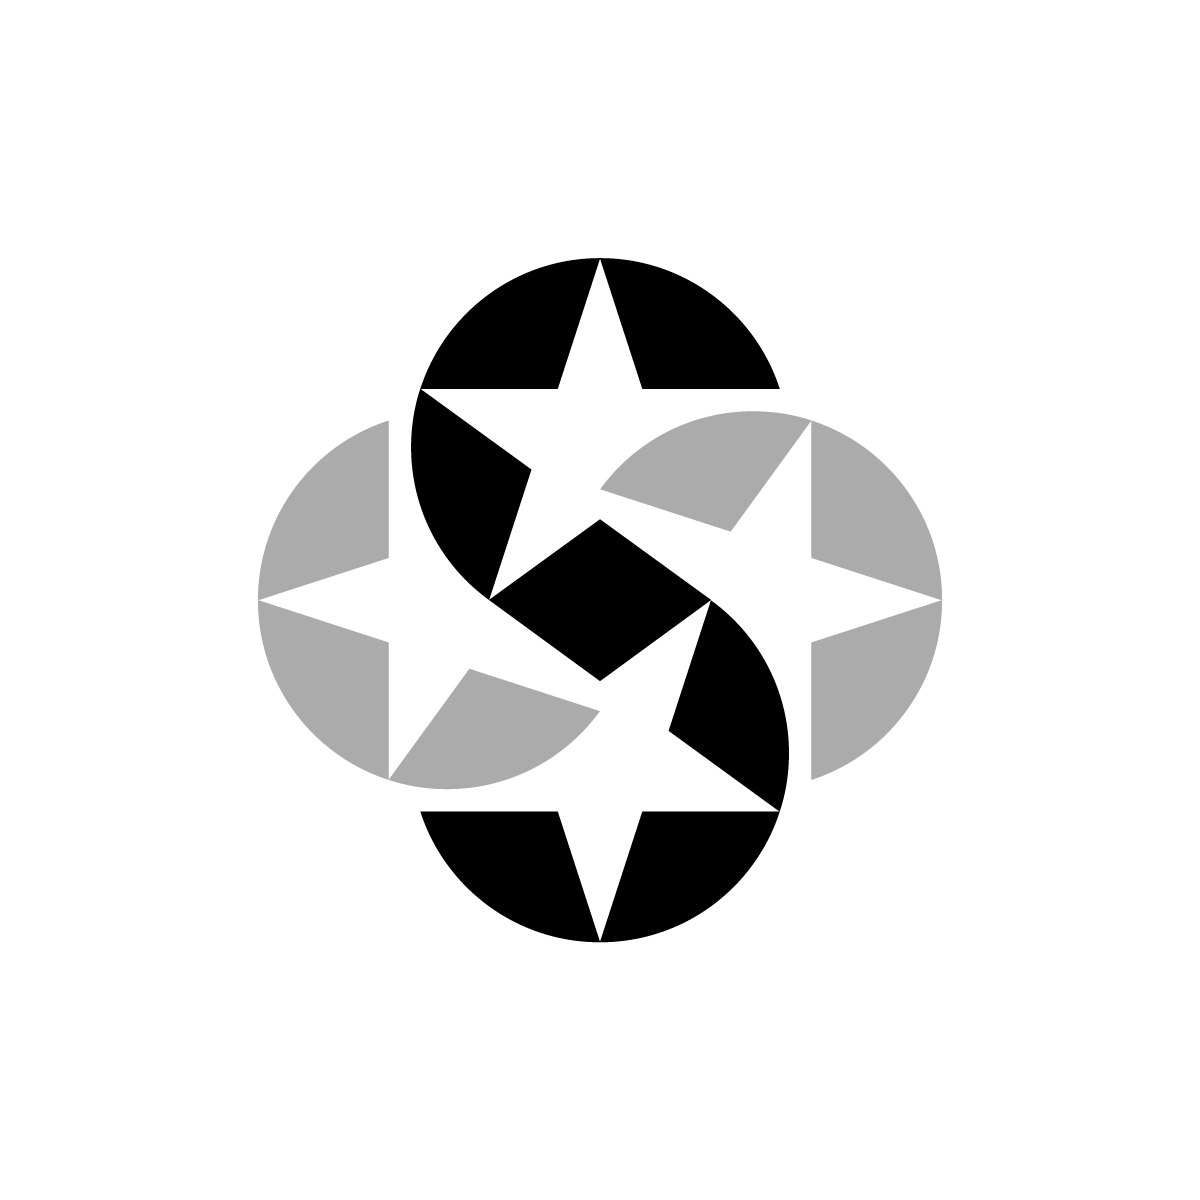 Stars S Logo creatively forms an 'S' with stars and circles, symbolizing excellence, unity, and limitless possibilities.